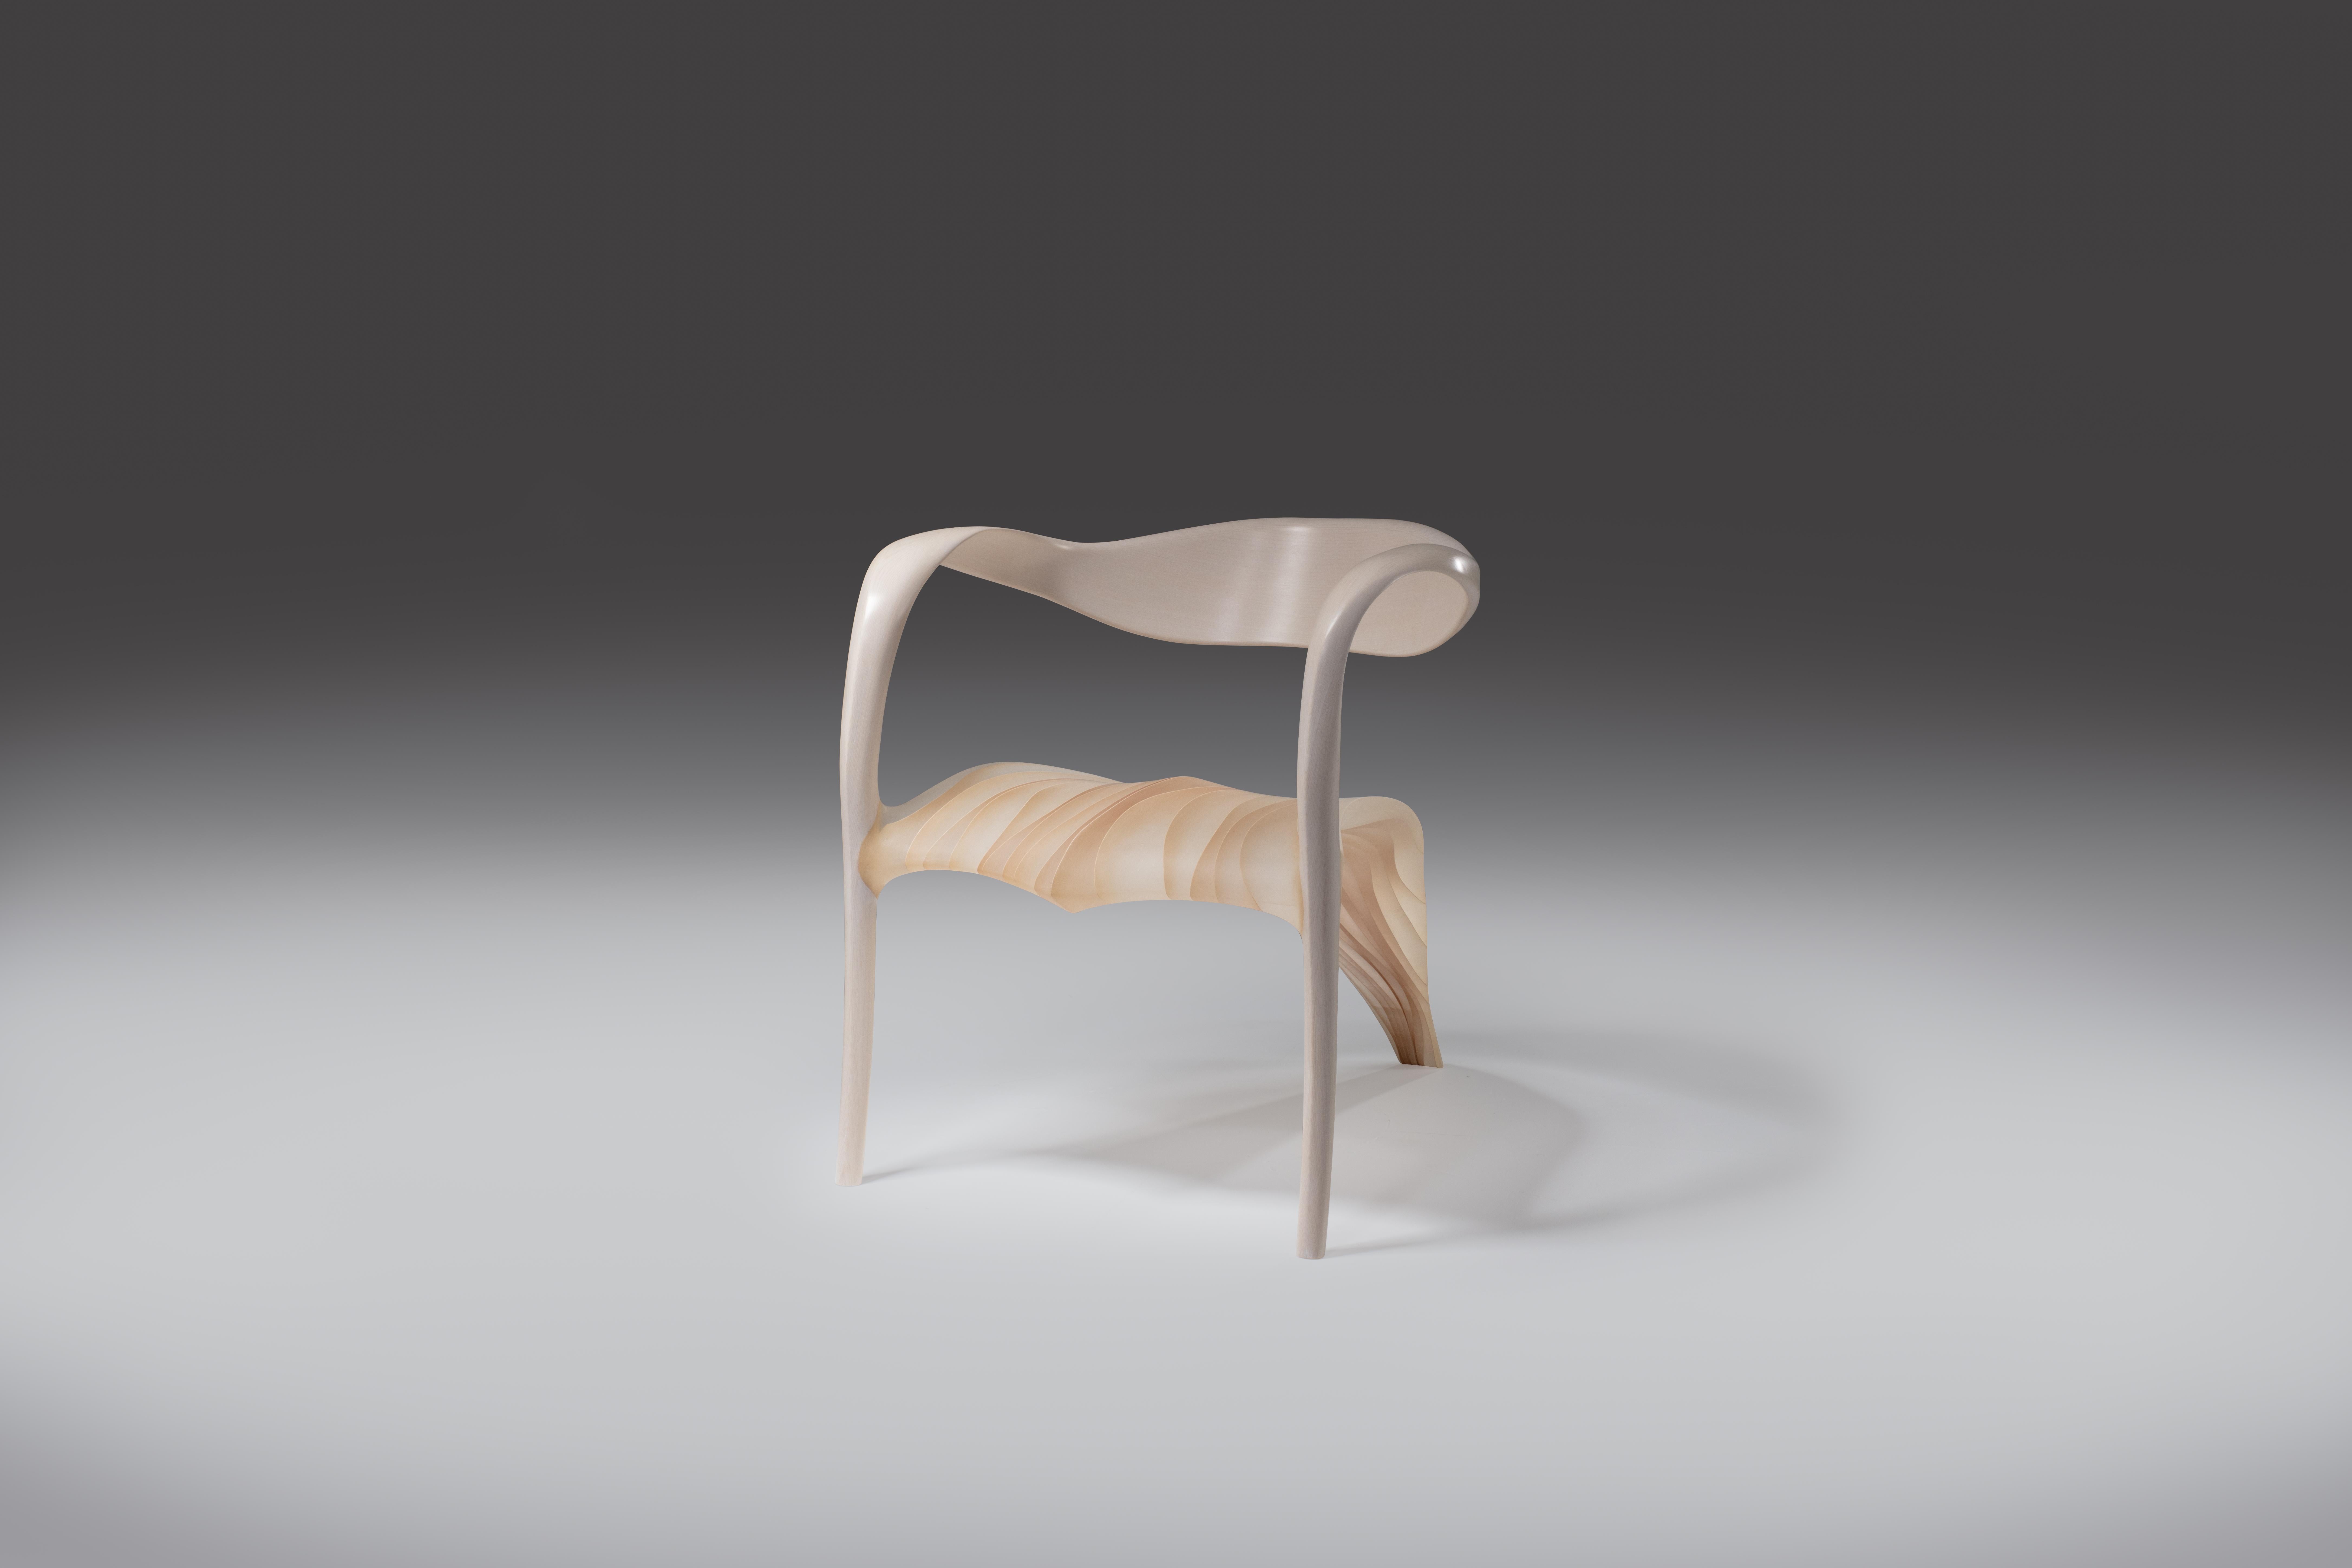 The Ethereal furniture is made from Marc Fish's usual laminated veneer technique, with the important difference that he leaves negative space between them – treating them not as layers within a solid stratigraphy, but as fins within a more open